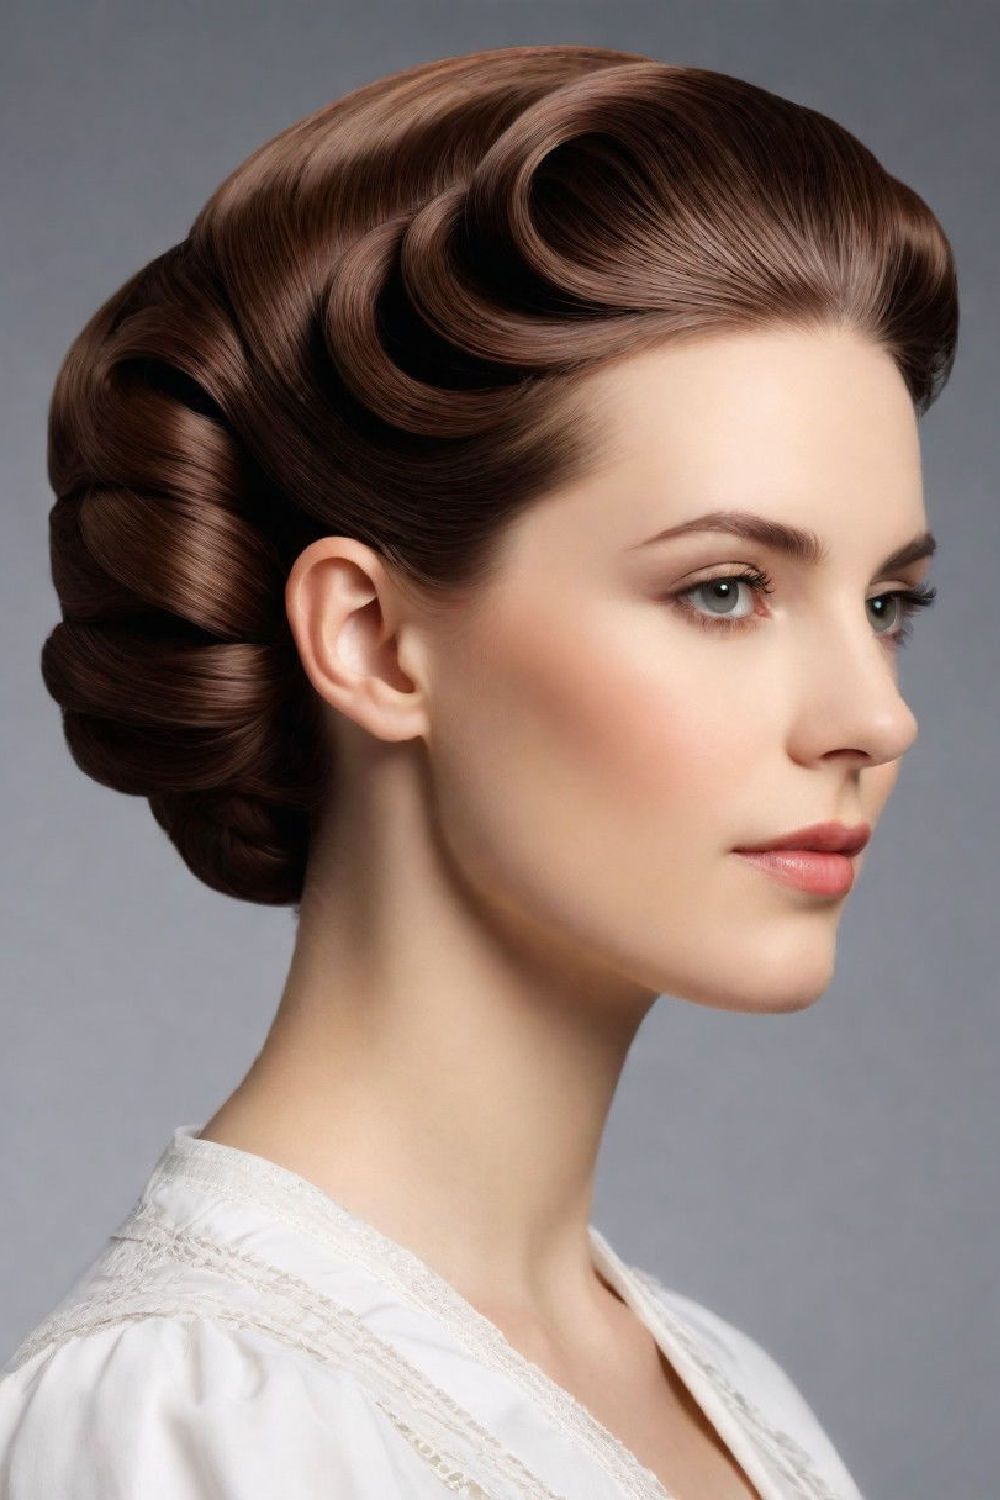 classic marcel waves victorian hairstyle